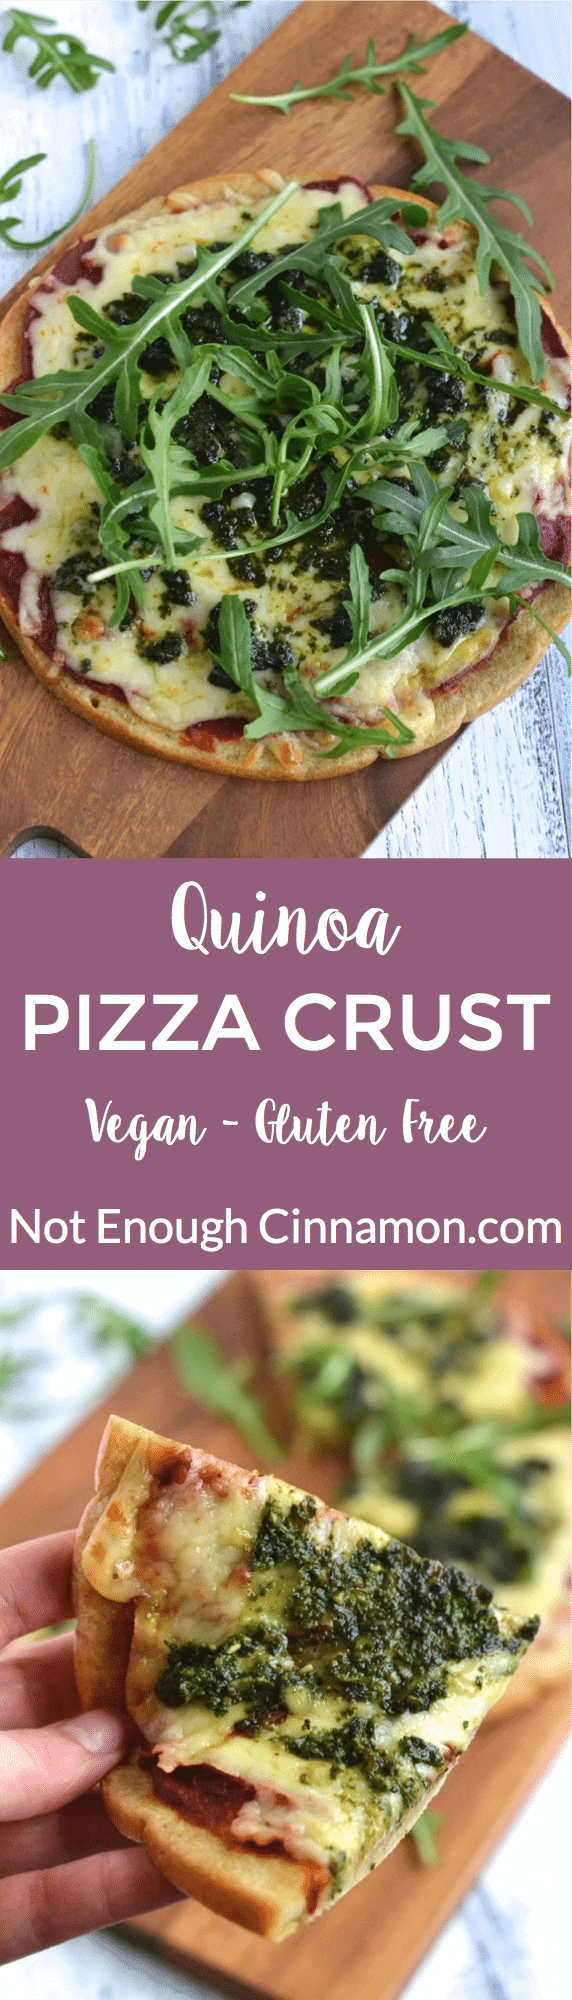 Foolproof quinoa pizza crust made with only 5 ingredients. Gluten free and vegan. | Find the recipe on NotEnoughCinnamon.com